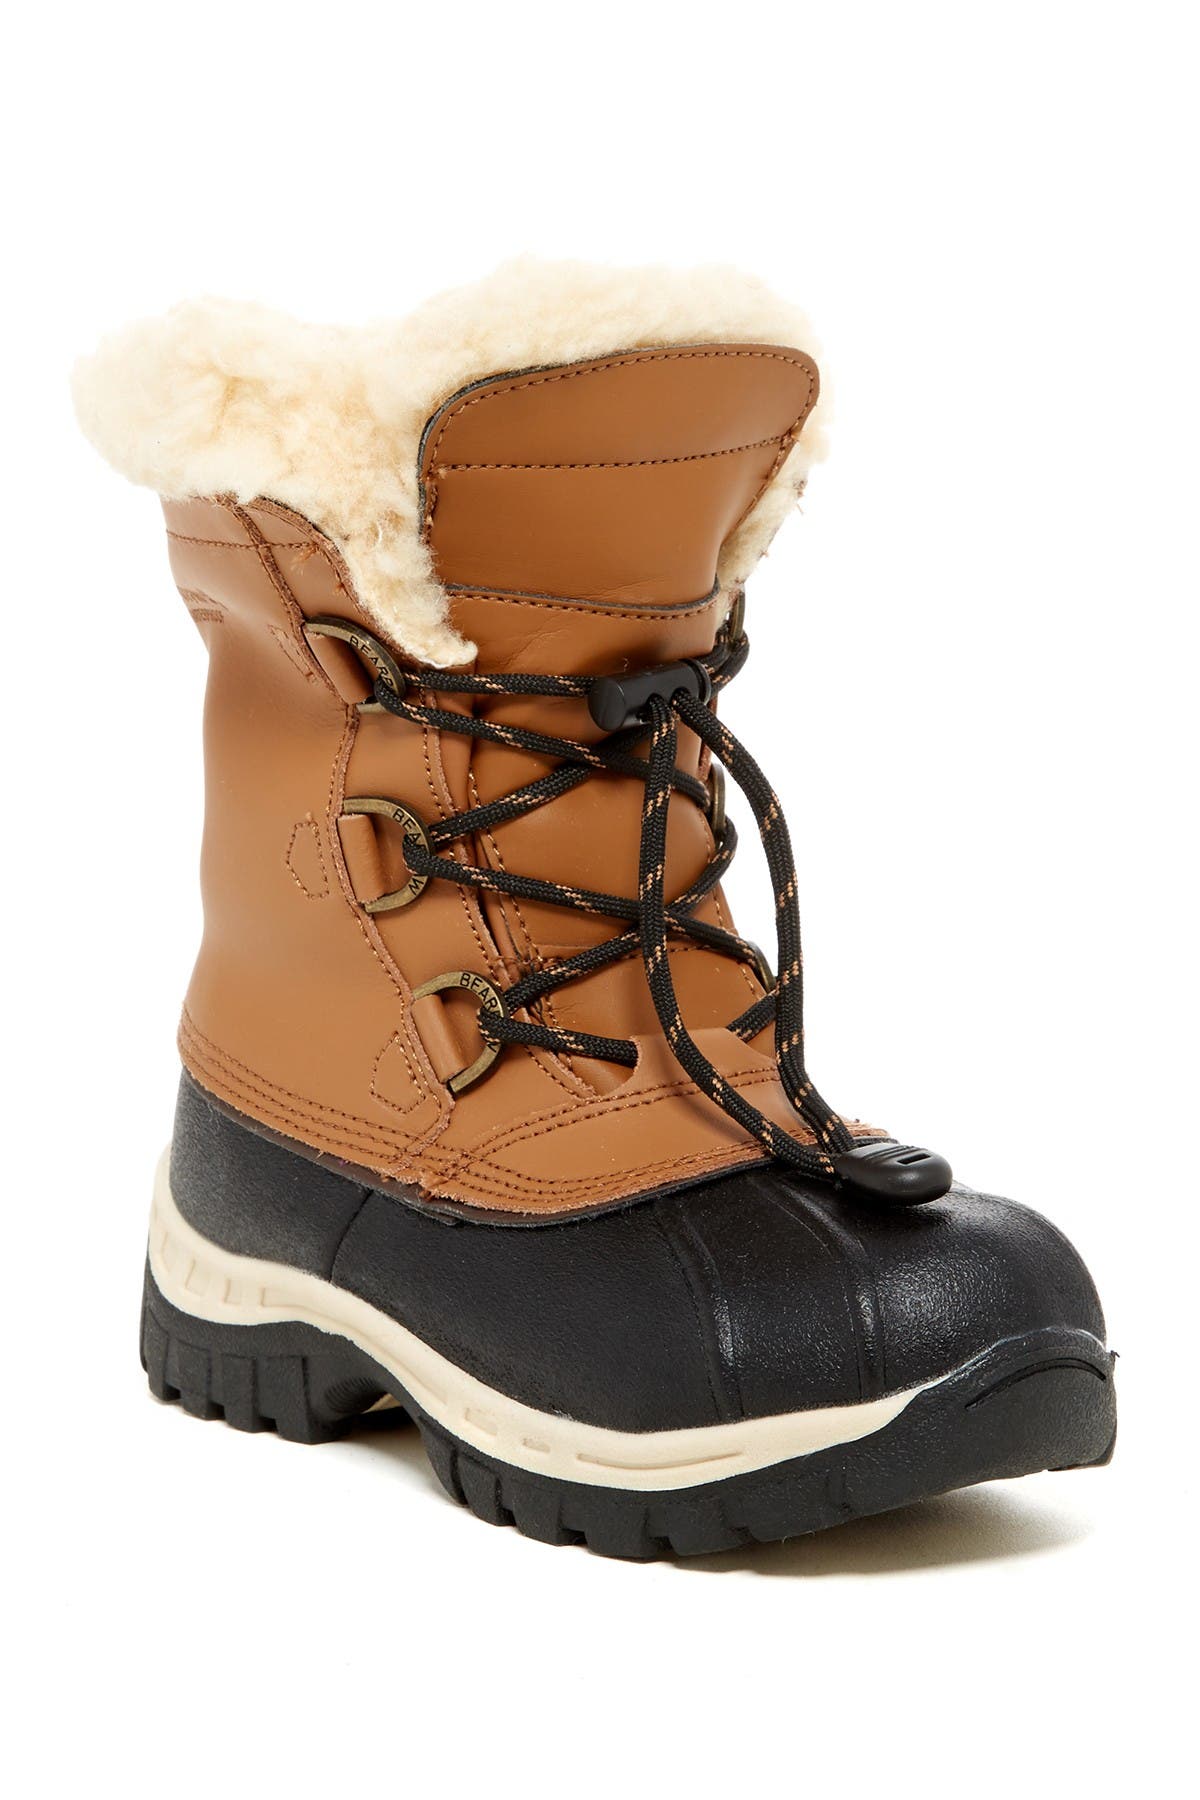 4t snow boots